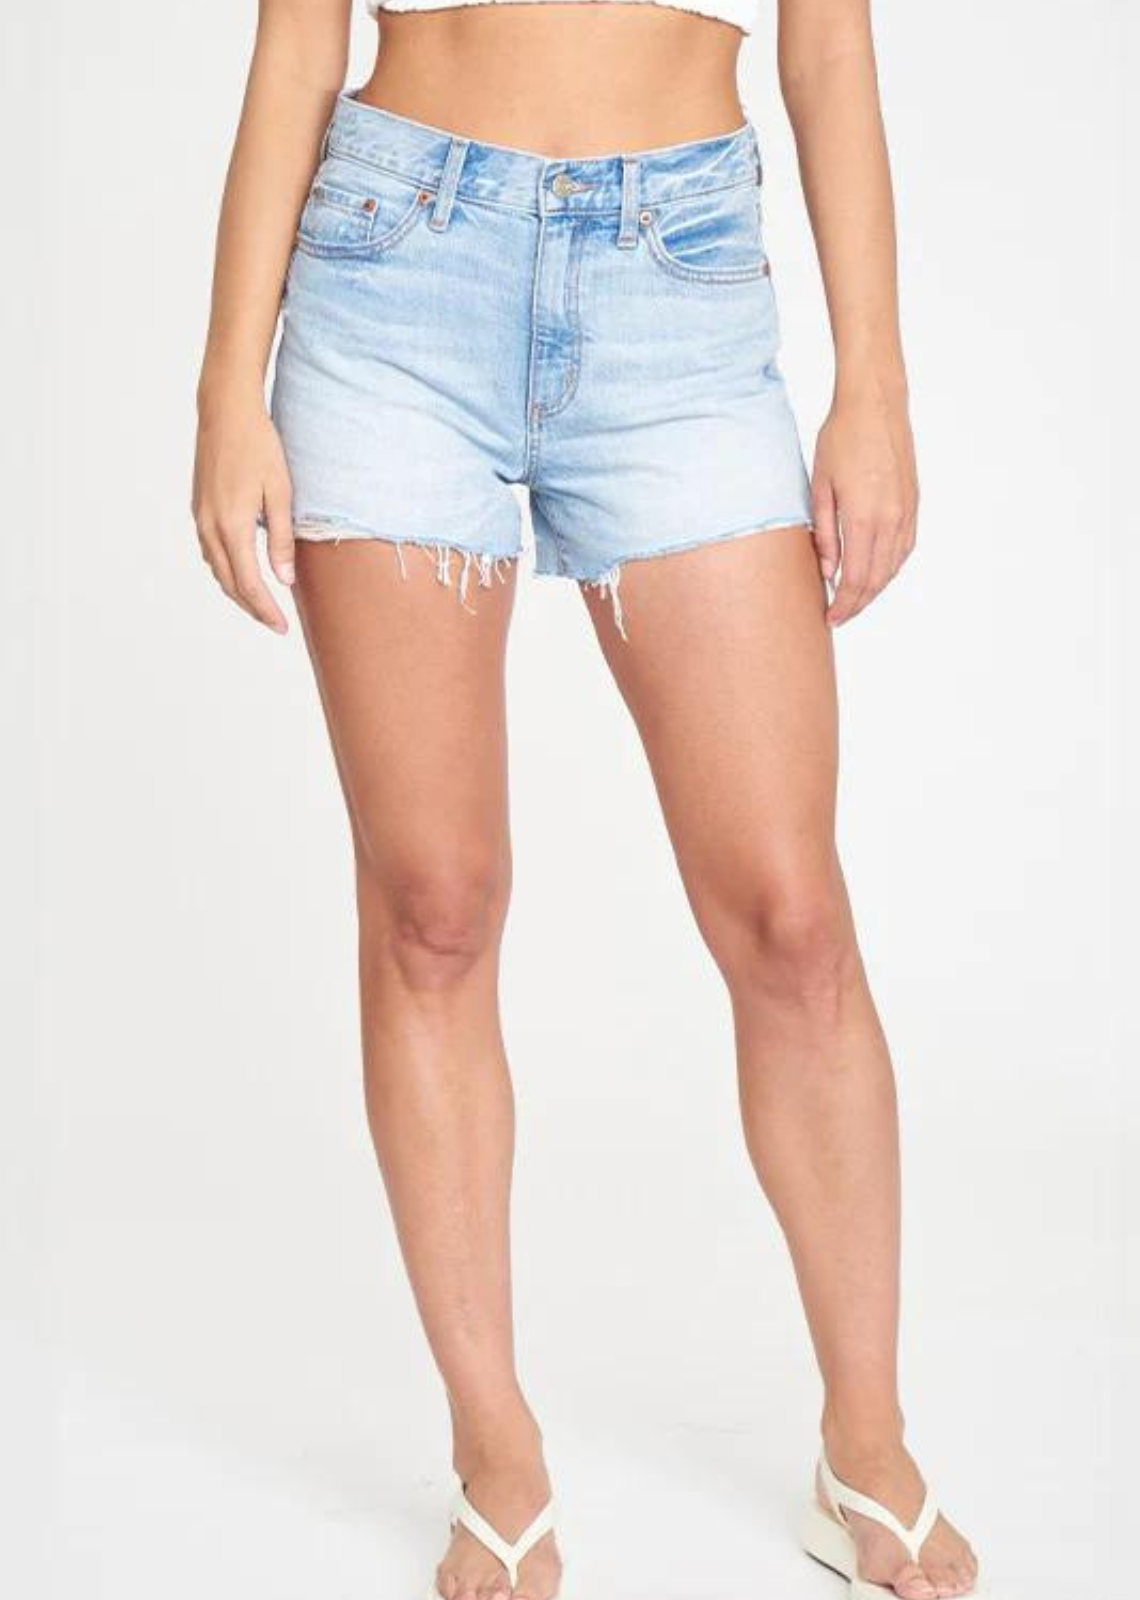 Daze Troublemaker High Rise Short. A light wash jean short in the most iconic fit of all time - the cutoff. With a versatile look and distressed hem, it is like a true vintage short.&nbsp;</span><span>Constructed in our most rigid fabric of 100% cotton materials, say hello to a timeless fit you can wear again and again.